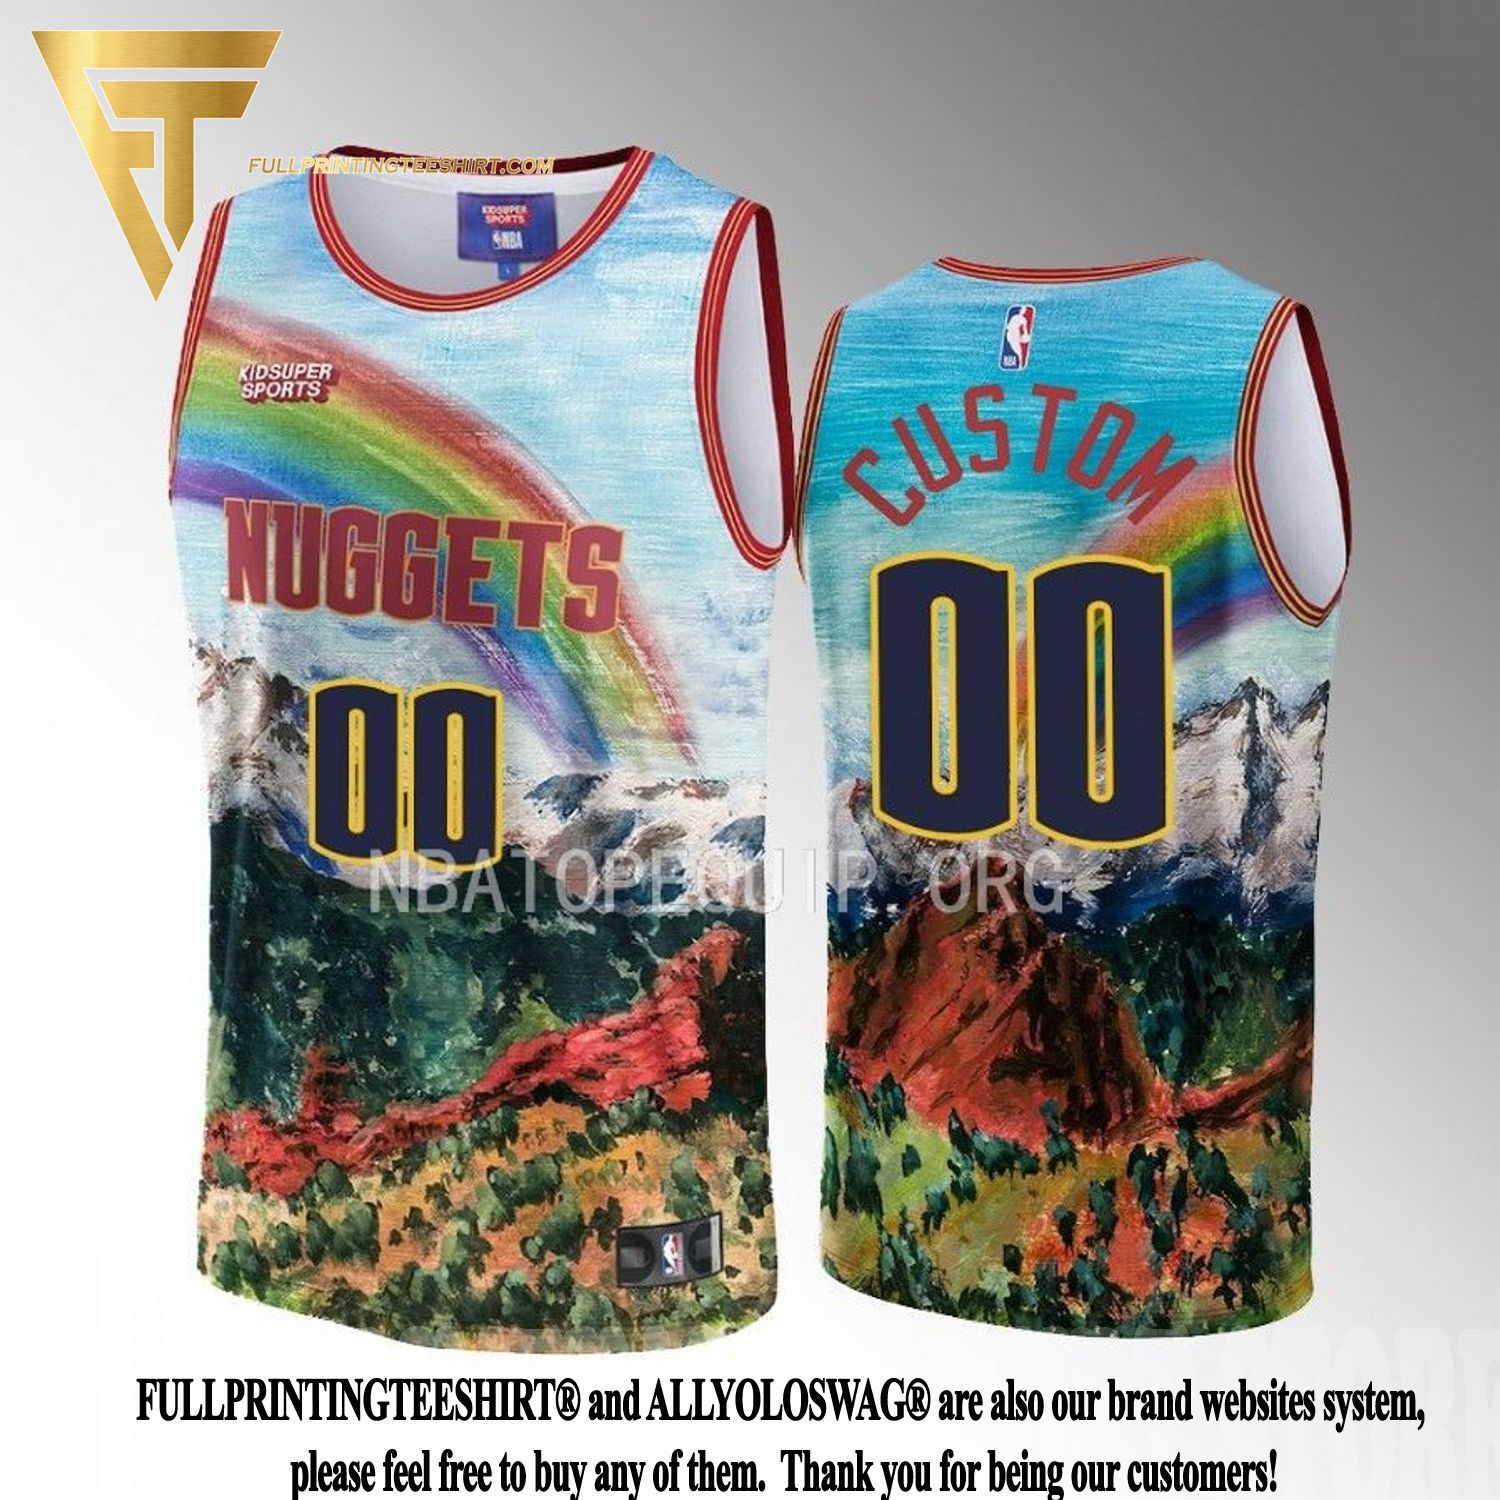 Why is the 2020 Nuggets City edition reselling for so much? : r/ denvernuggets